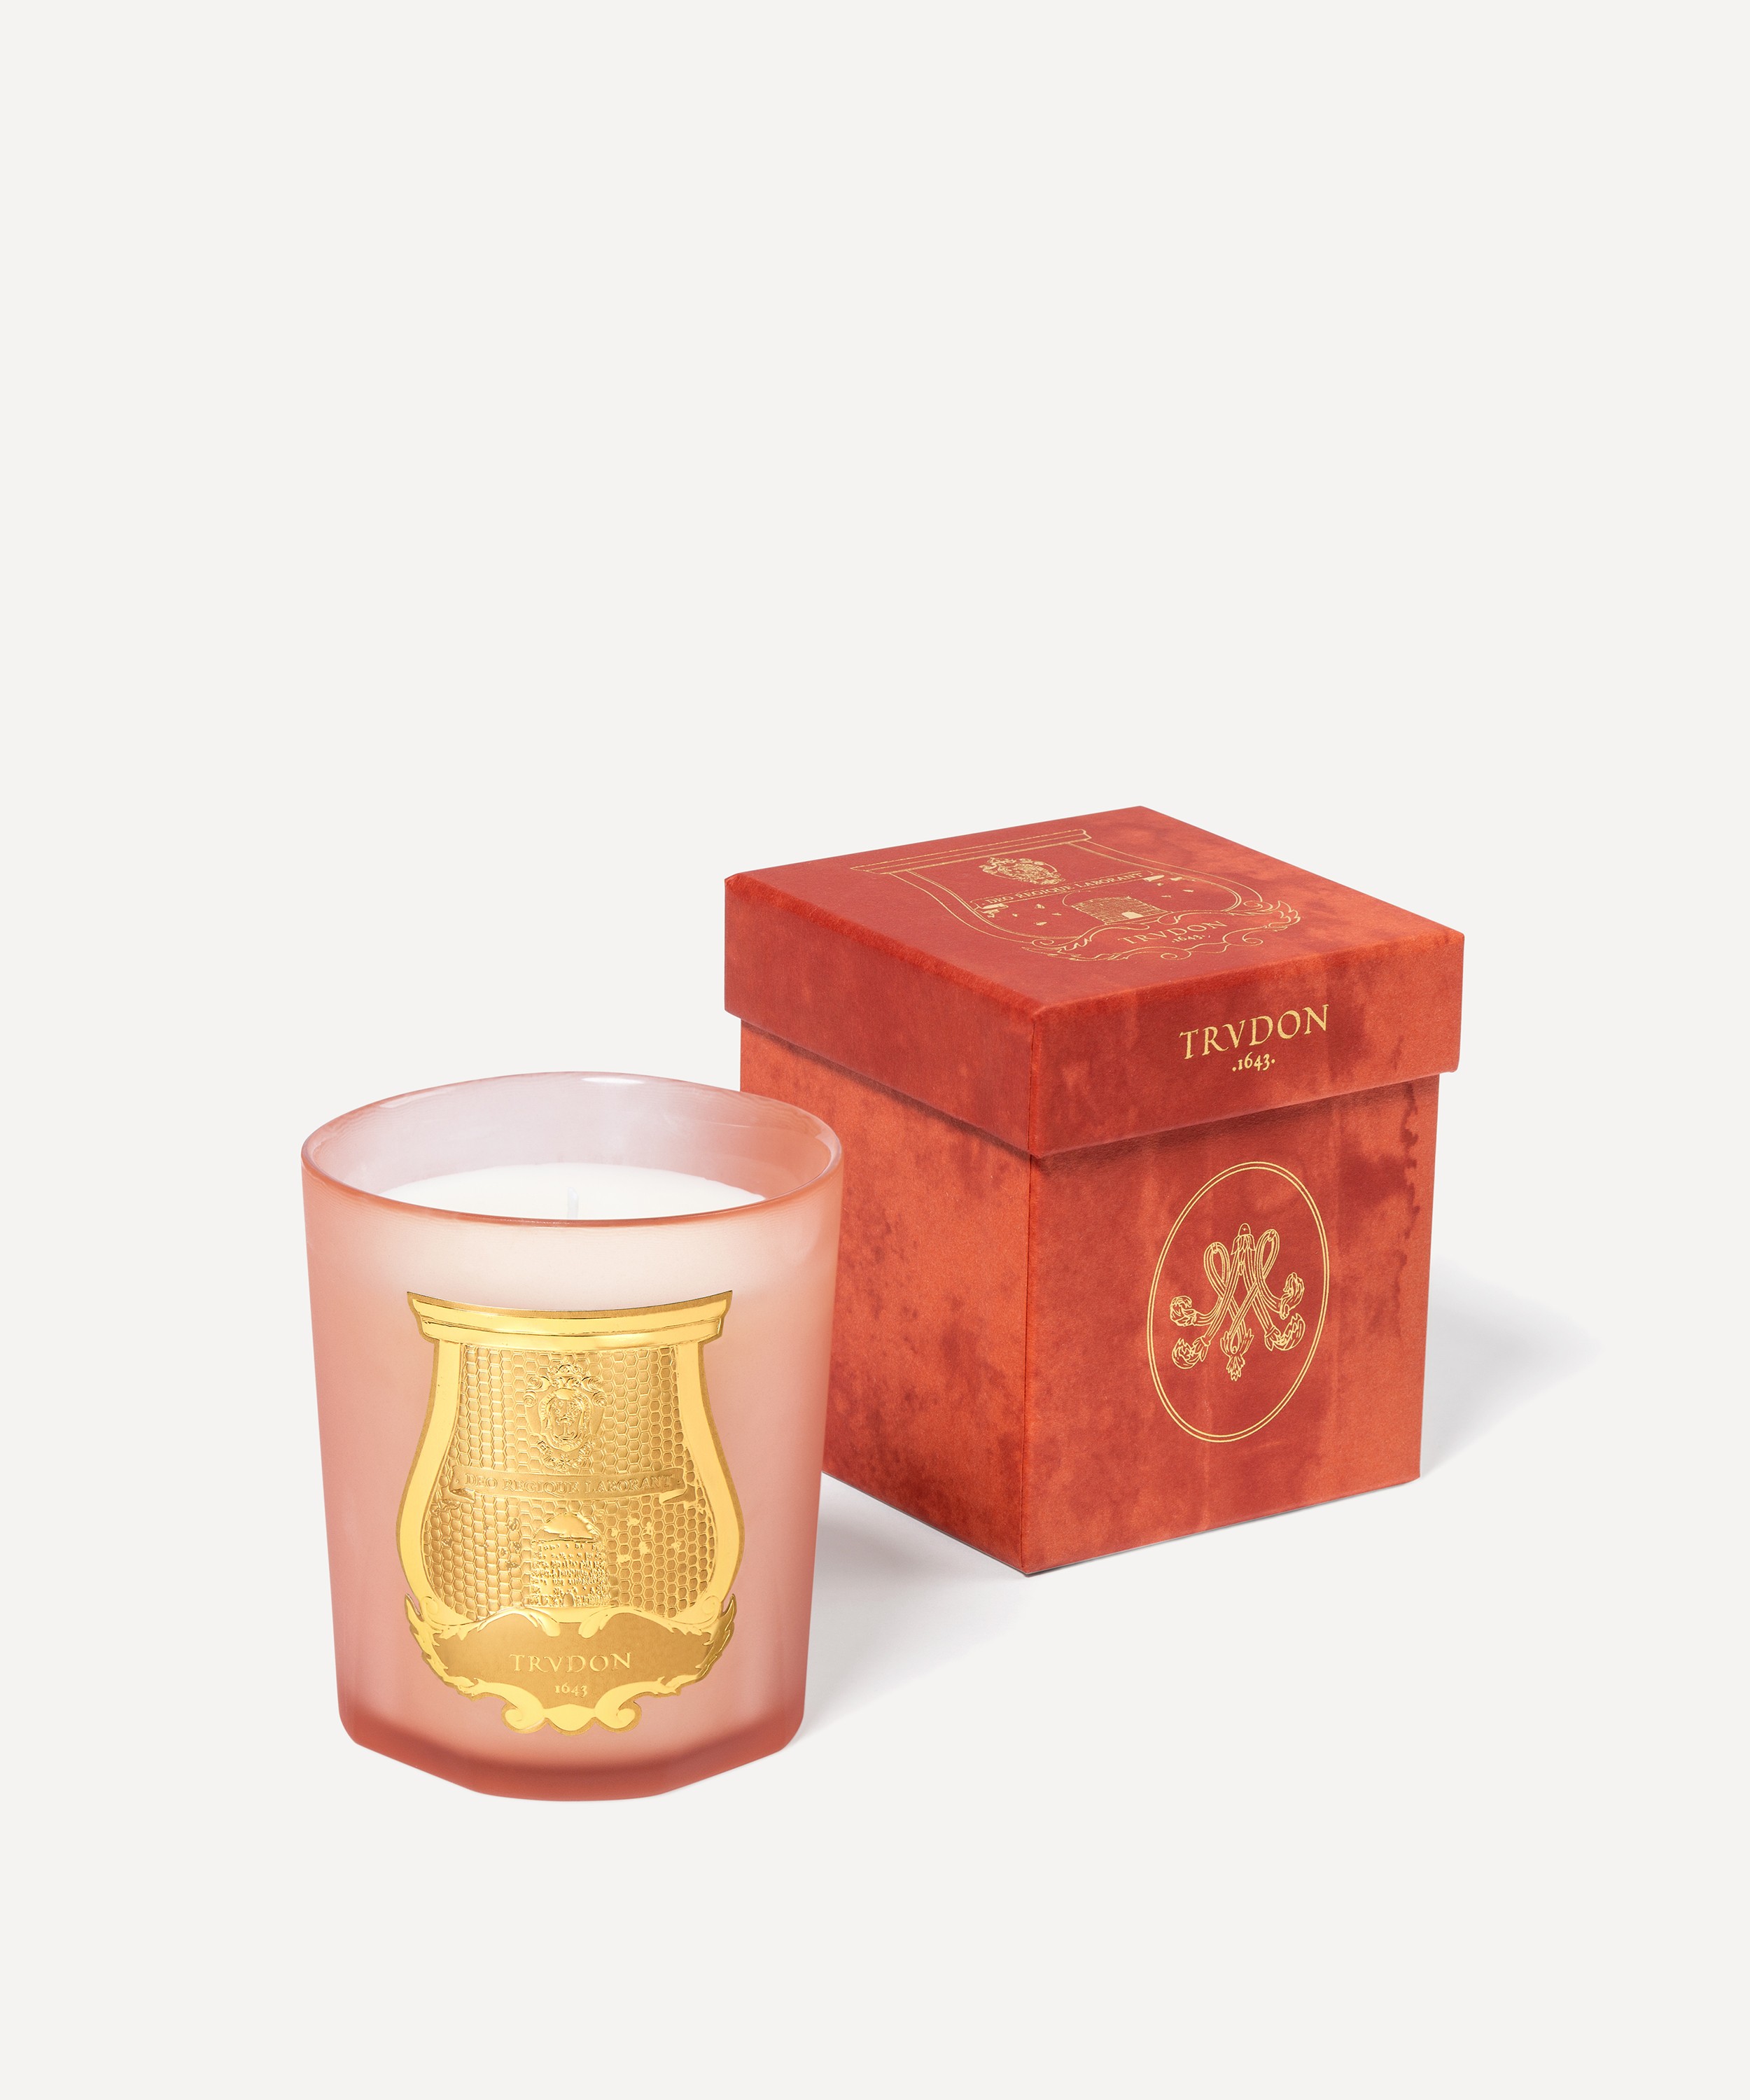 Trudon - Tuileries Scented Candle 270g image number 1